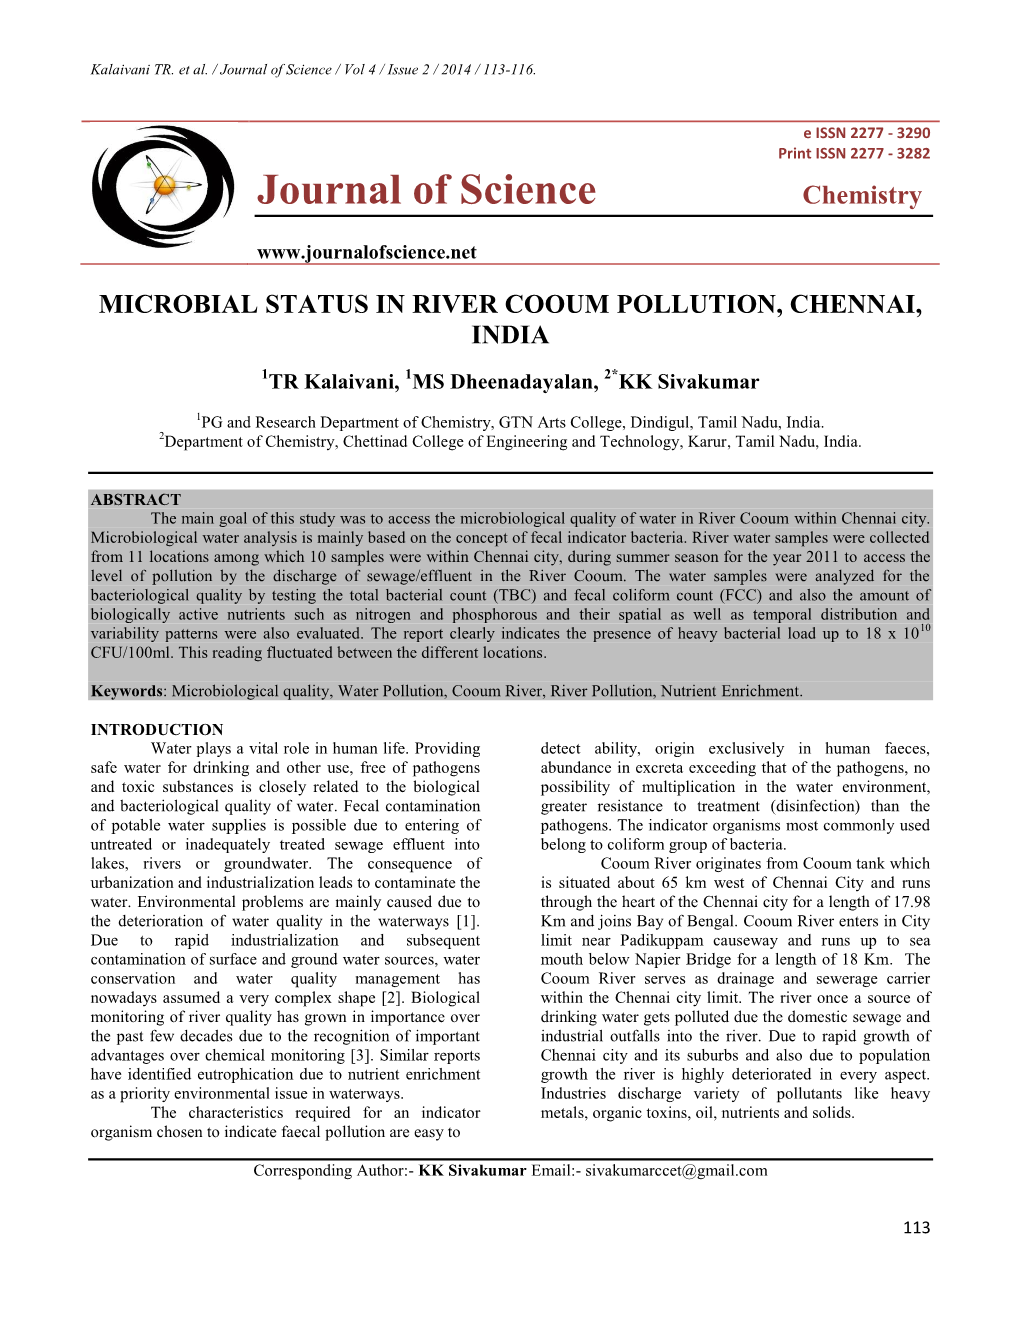 Journal of Science / Vol 4 / Issue 2 / 2014 / 113-116